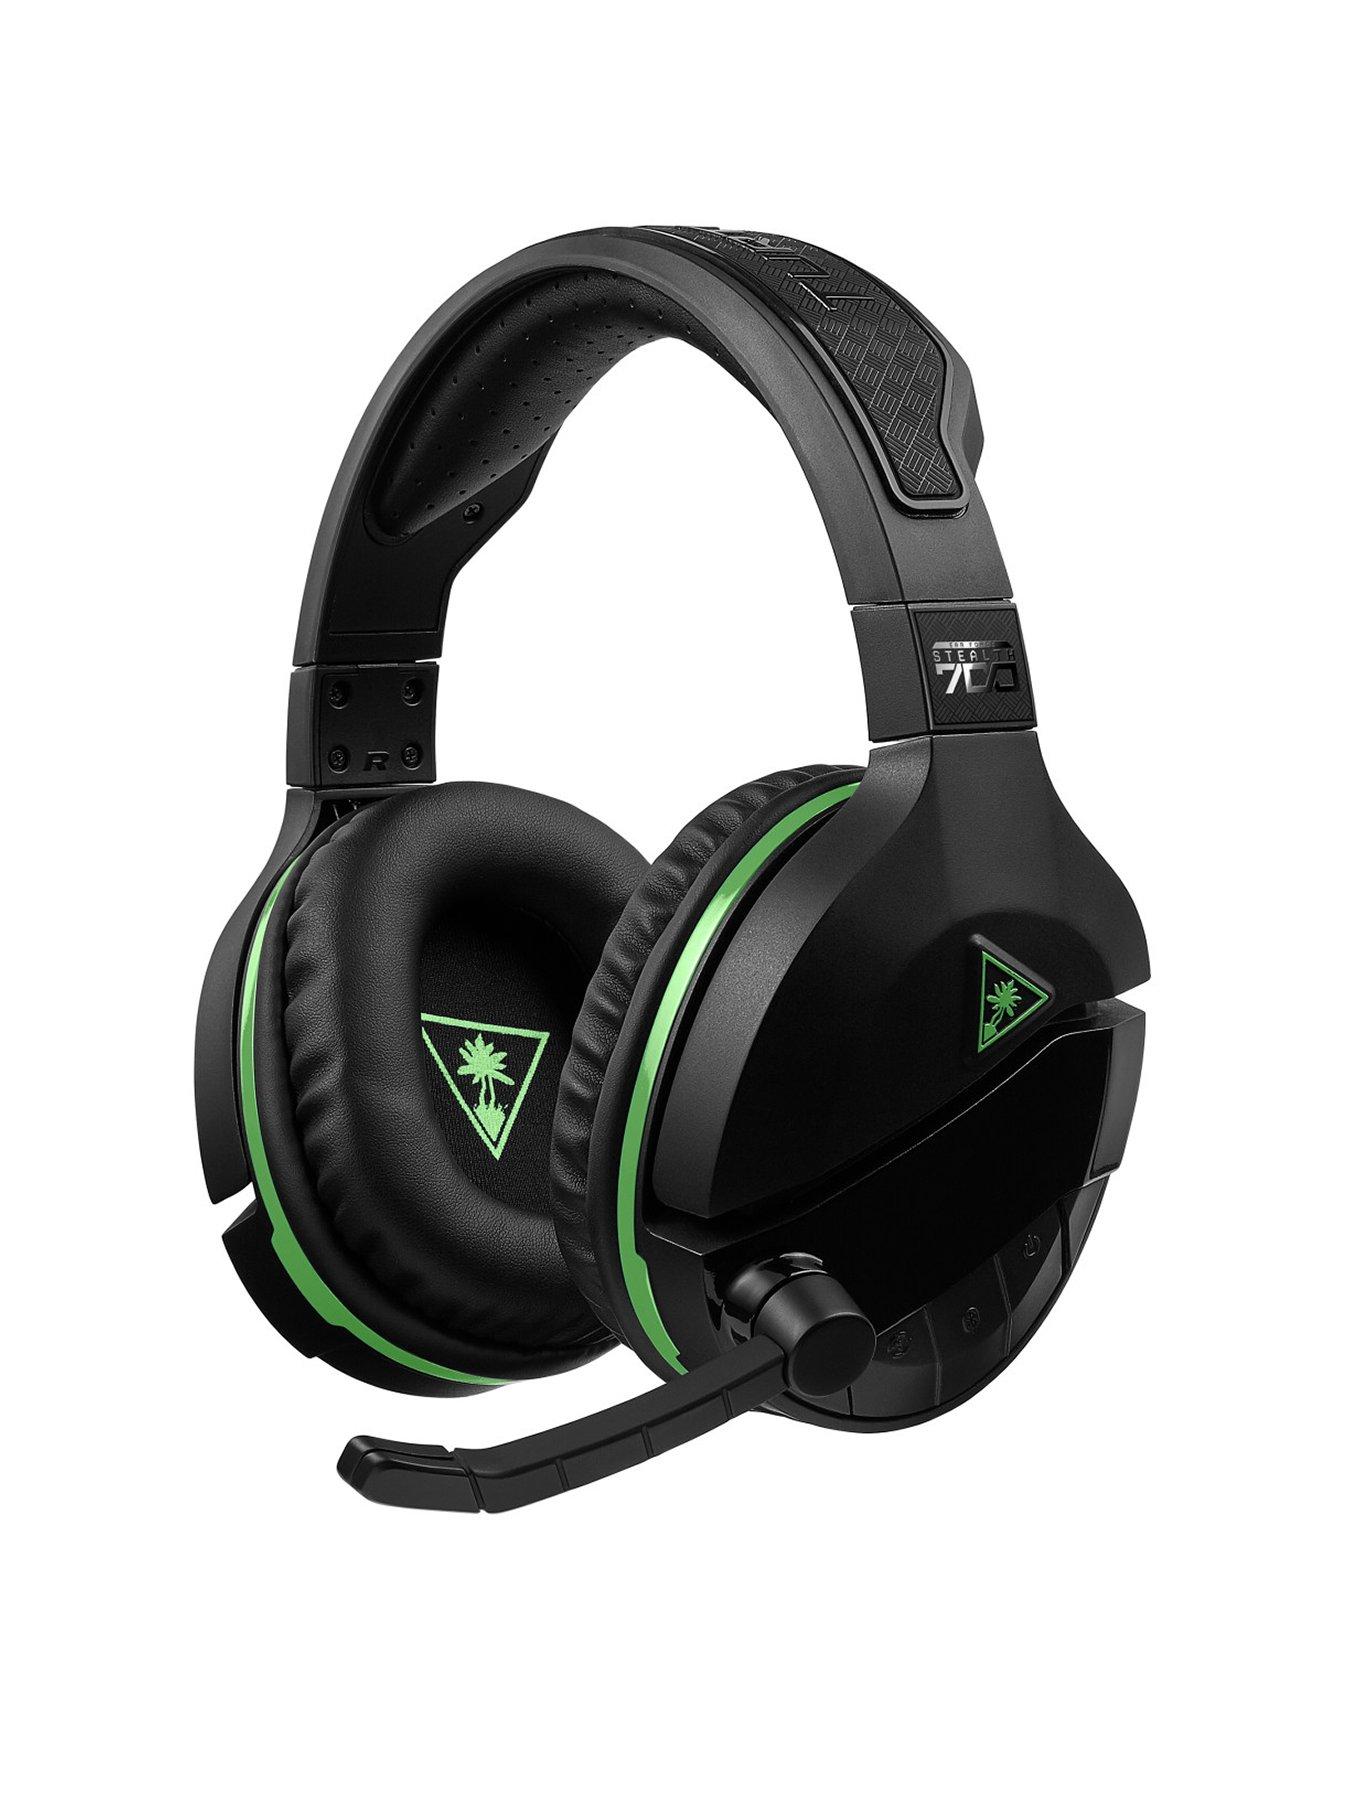 Stealth 700 Wireless Gaming Headset For Xbox One With Free Xbox Live Gold Membership 3 Months - golden gamer headset codes roblox